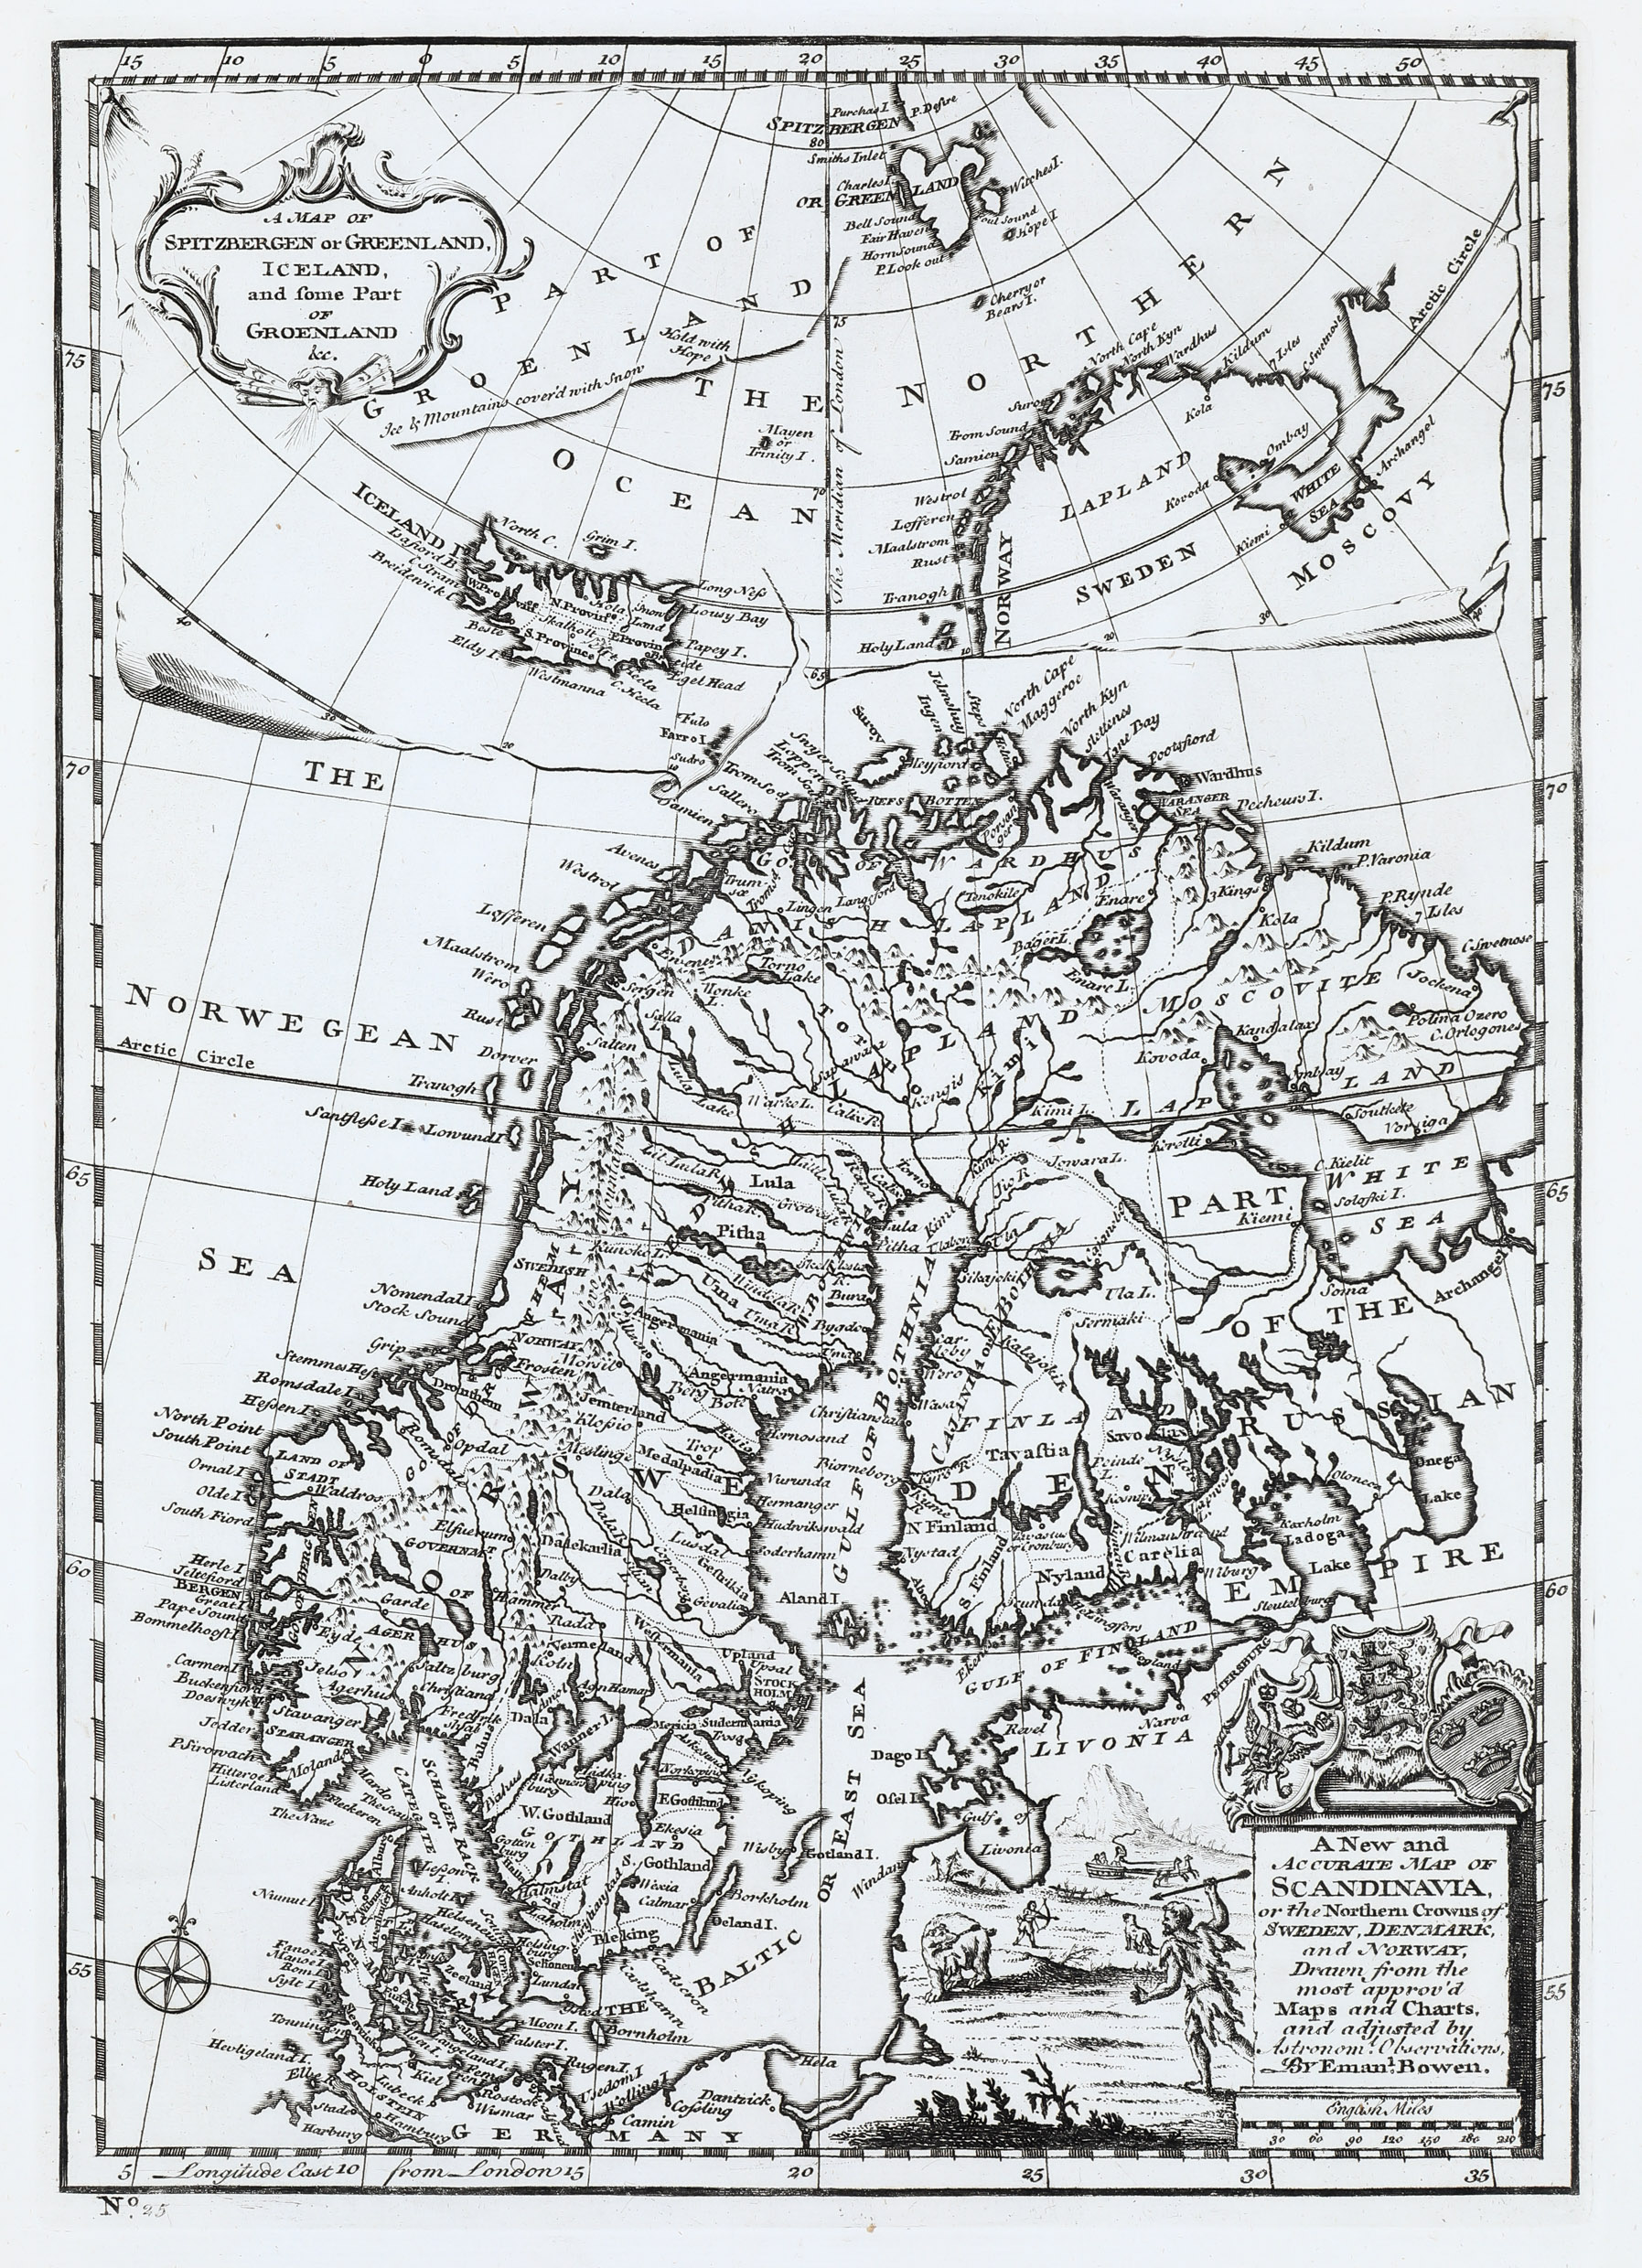 91. Map of Spitzbergen or Greenland, Iceland and some part of Groenland & c.